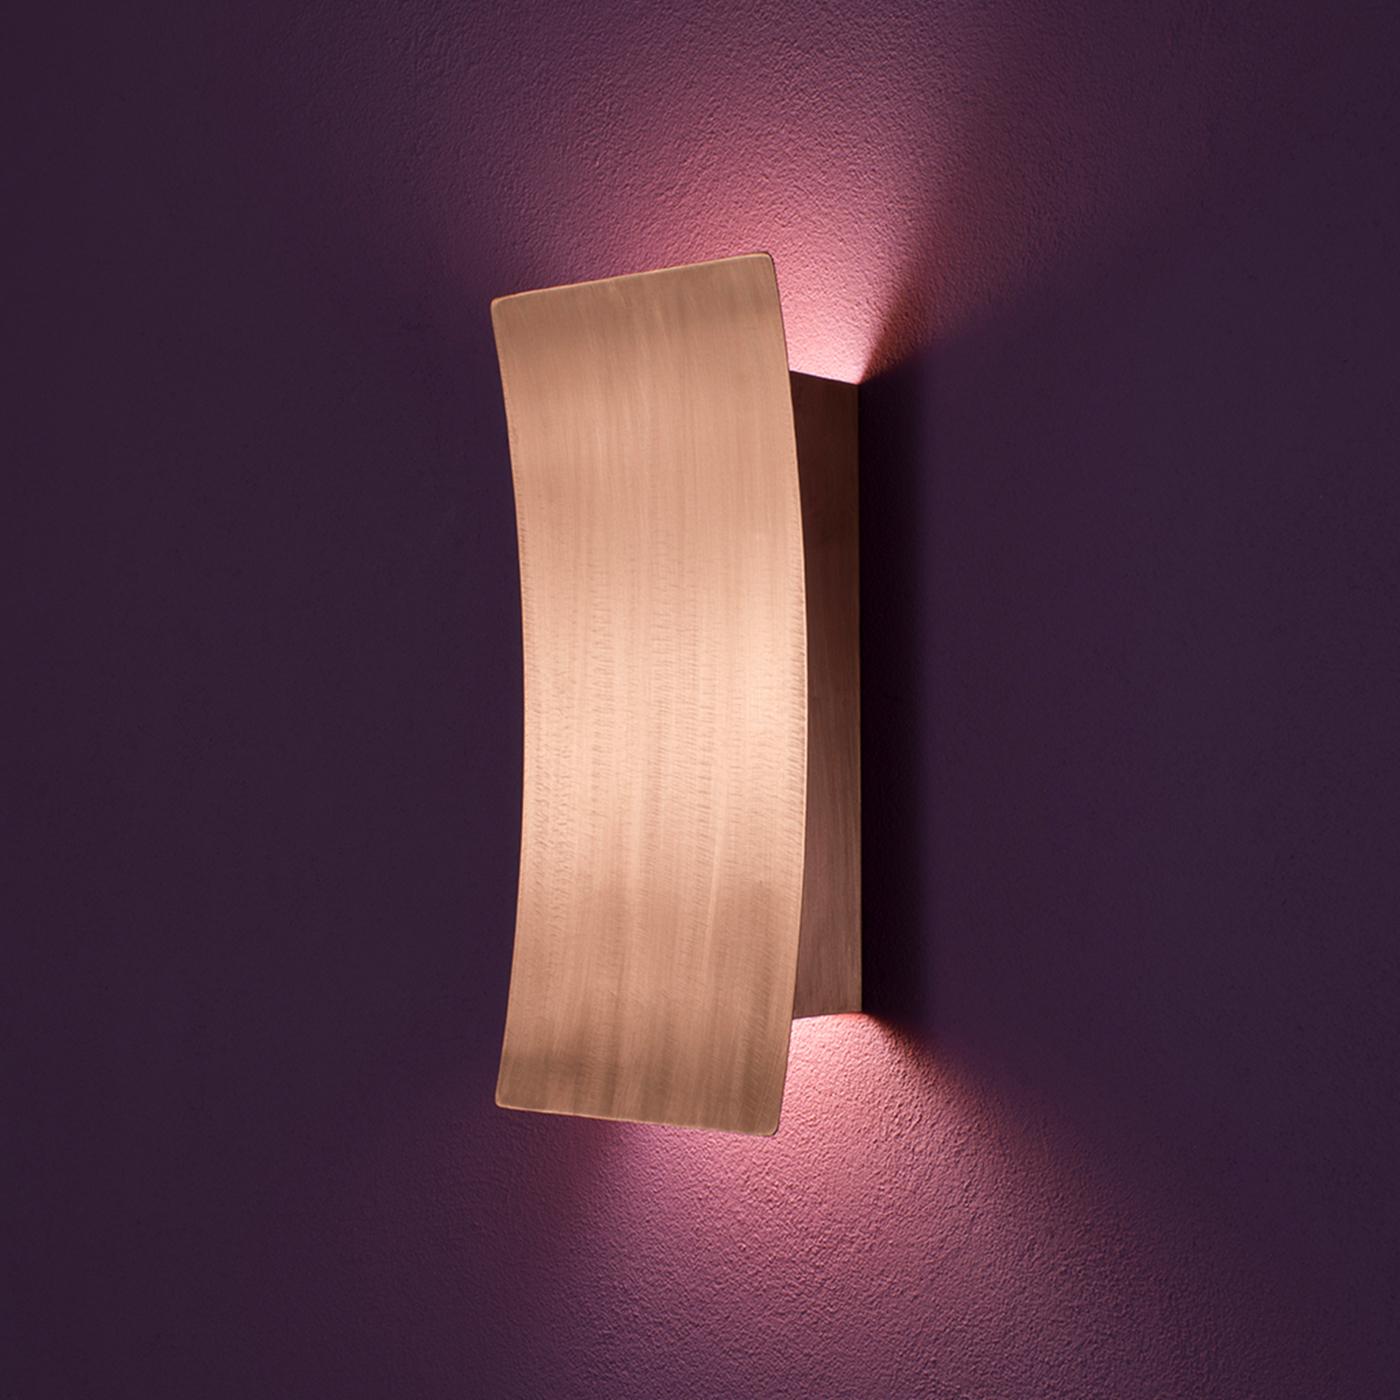 Emitting an evocative, soft light, this sconce is available in bright brass or satin steel. It features an arch-shaped lampshade fixed on a wall diffuser that will boast a warm light at every height. The satin metal captures and spreads the light in